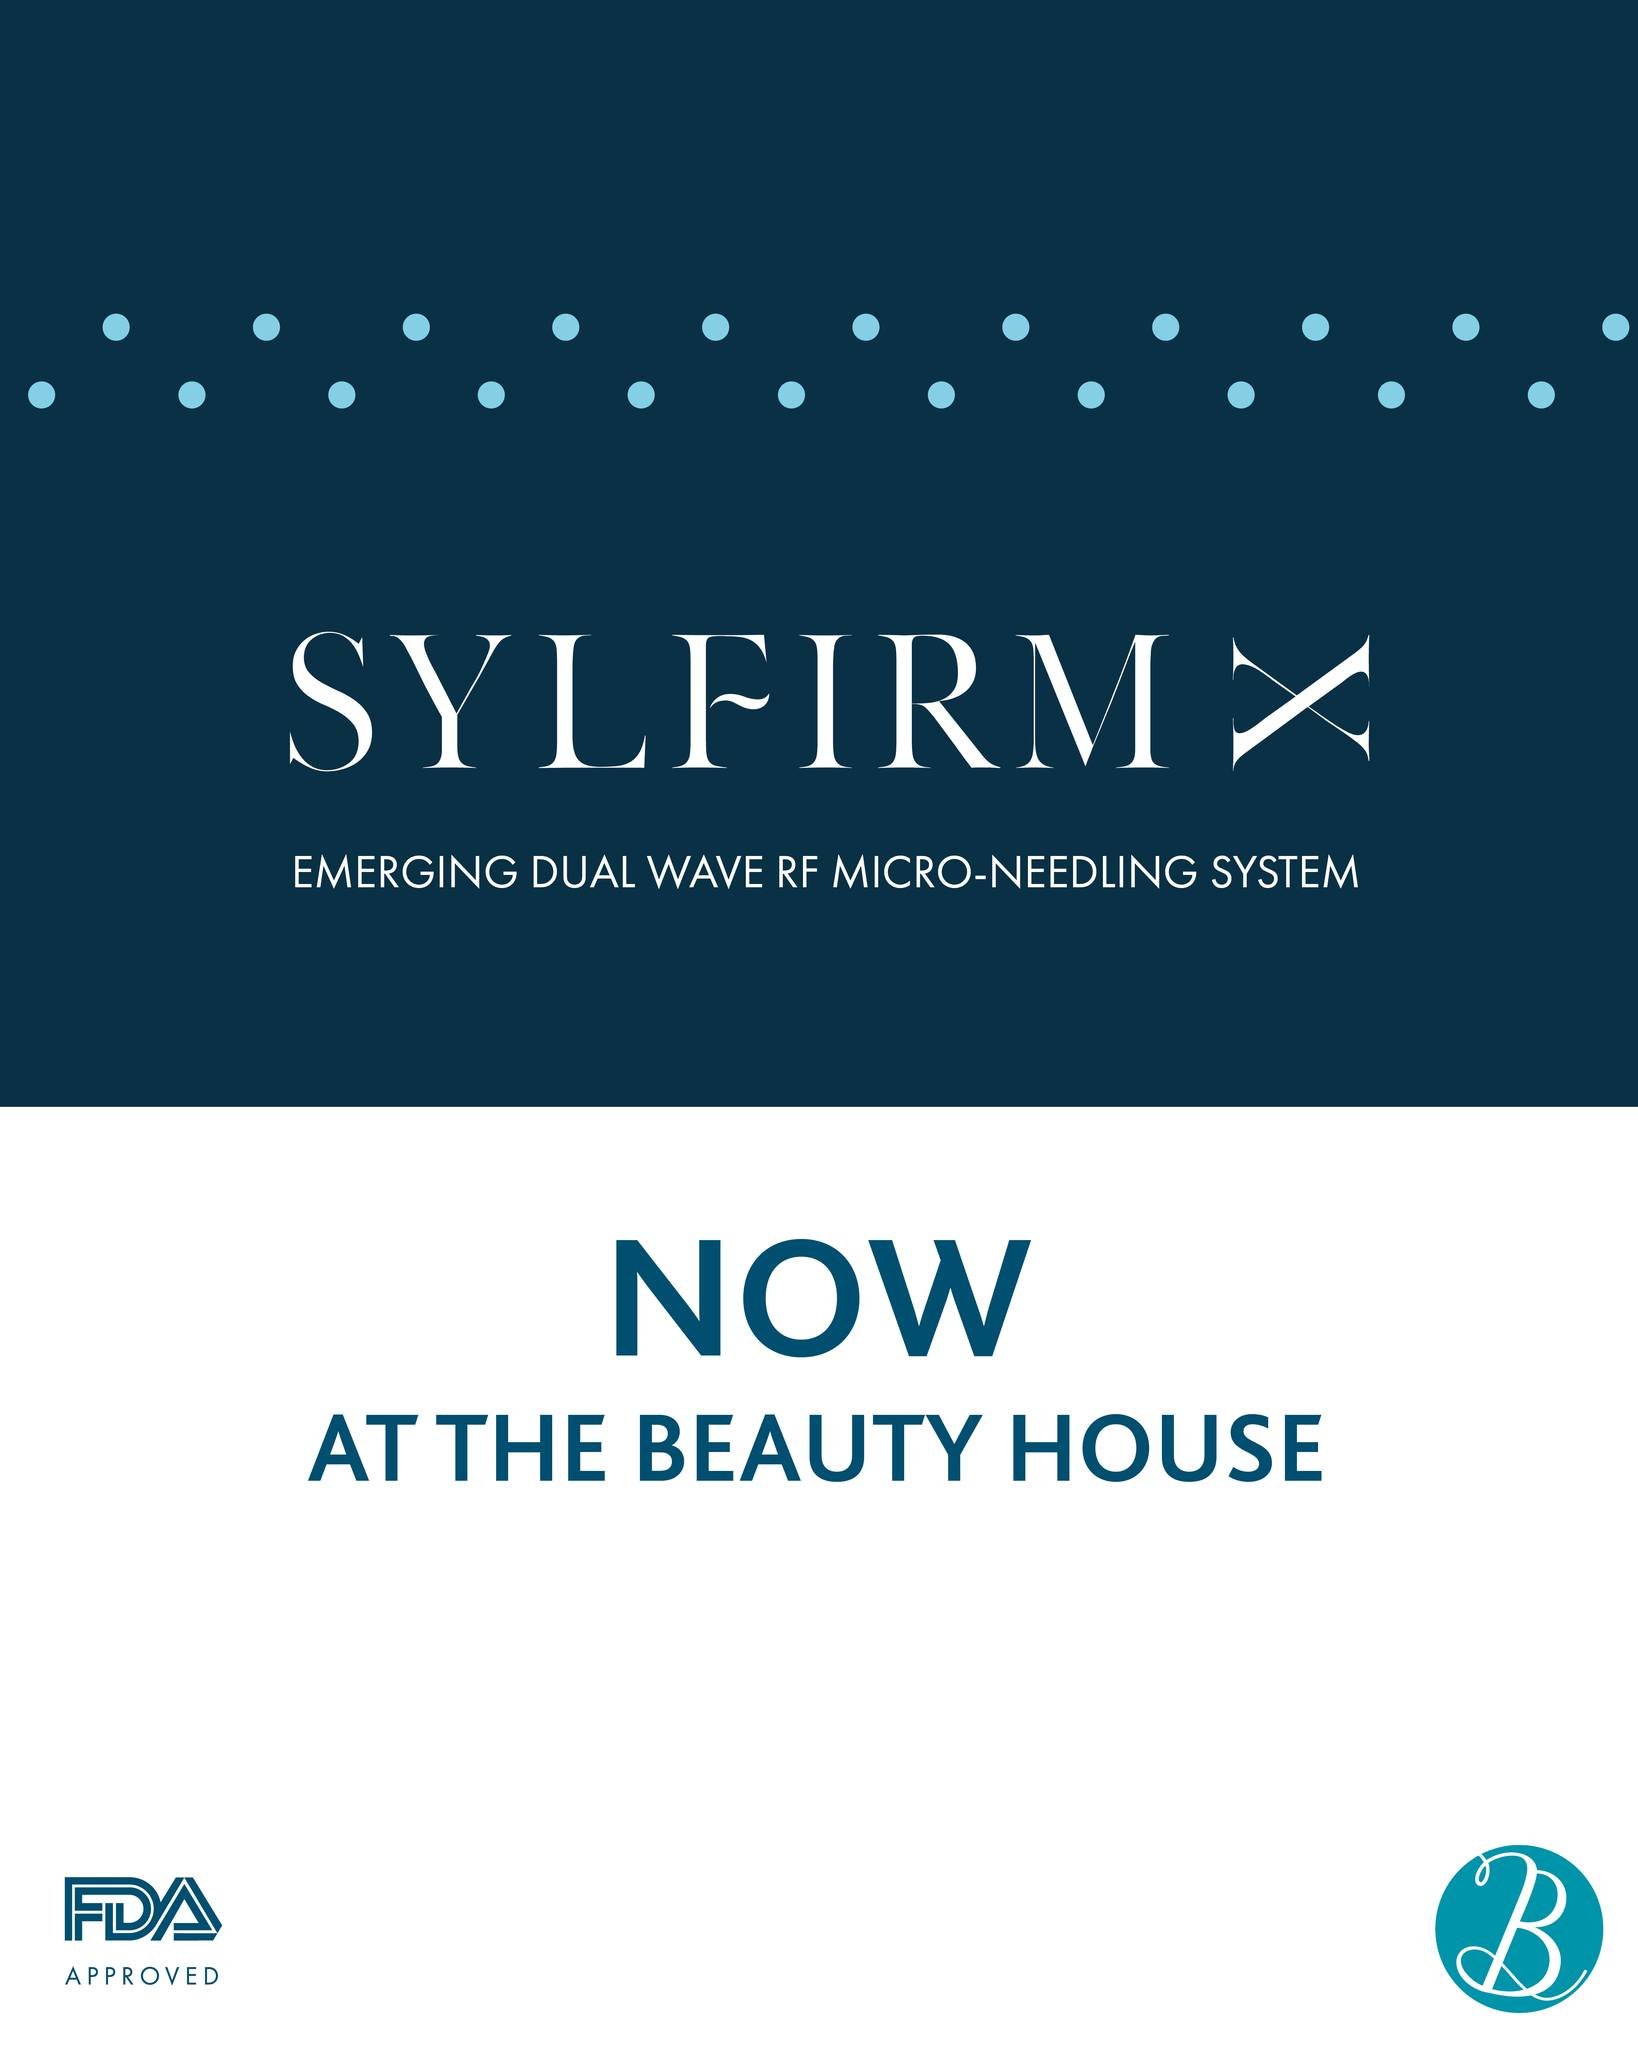 Improve skin tone, boost collagen and have clearer and more radiant looking skin with Sylfirm X, now at the Beauty House. 

Sylfirm X uses multiple tiny electrodes to generate a powerful electromagnetic field of energy that safely and effectively pen